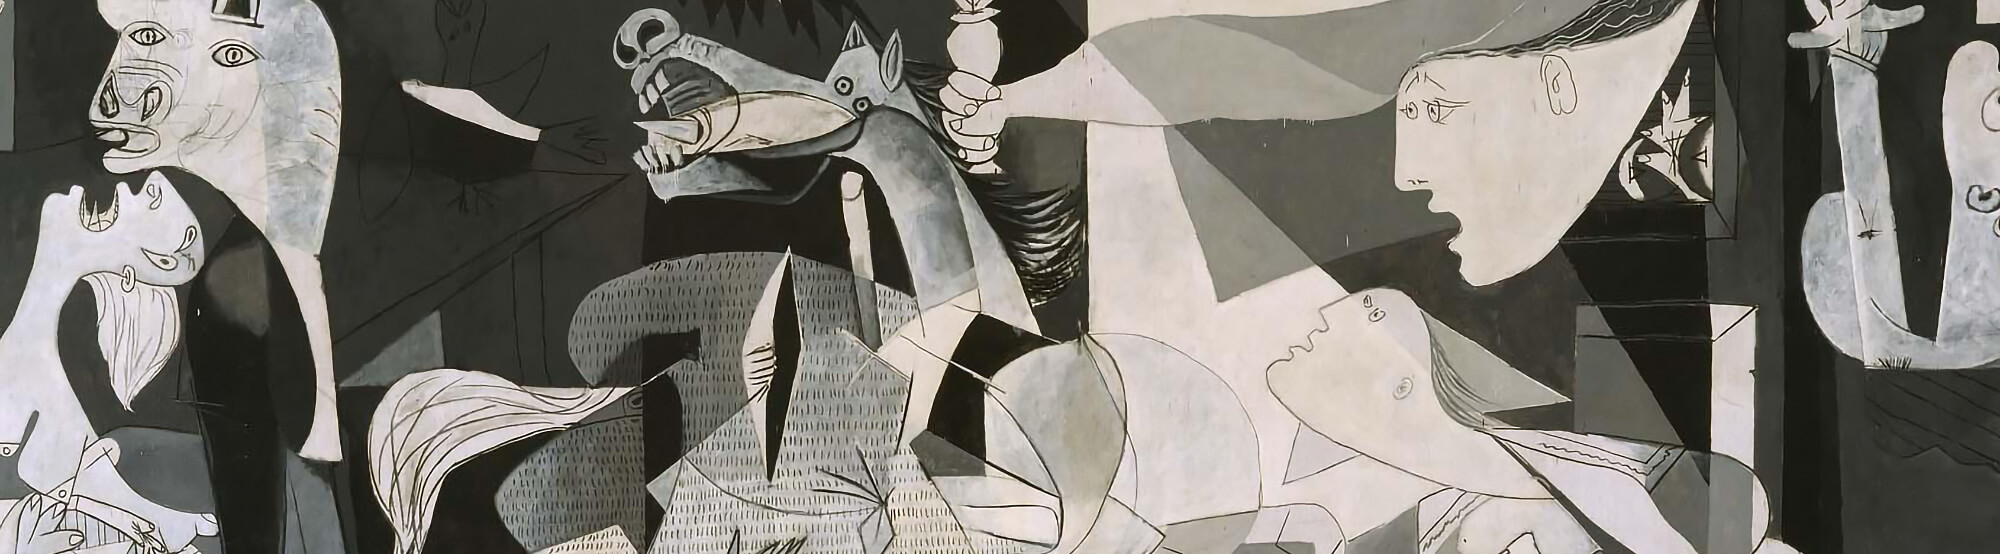 The Meaning behind "Guernica" - Pablo Picassos Most-famous Cubist